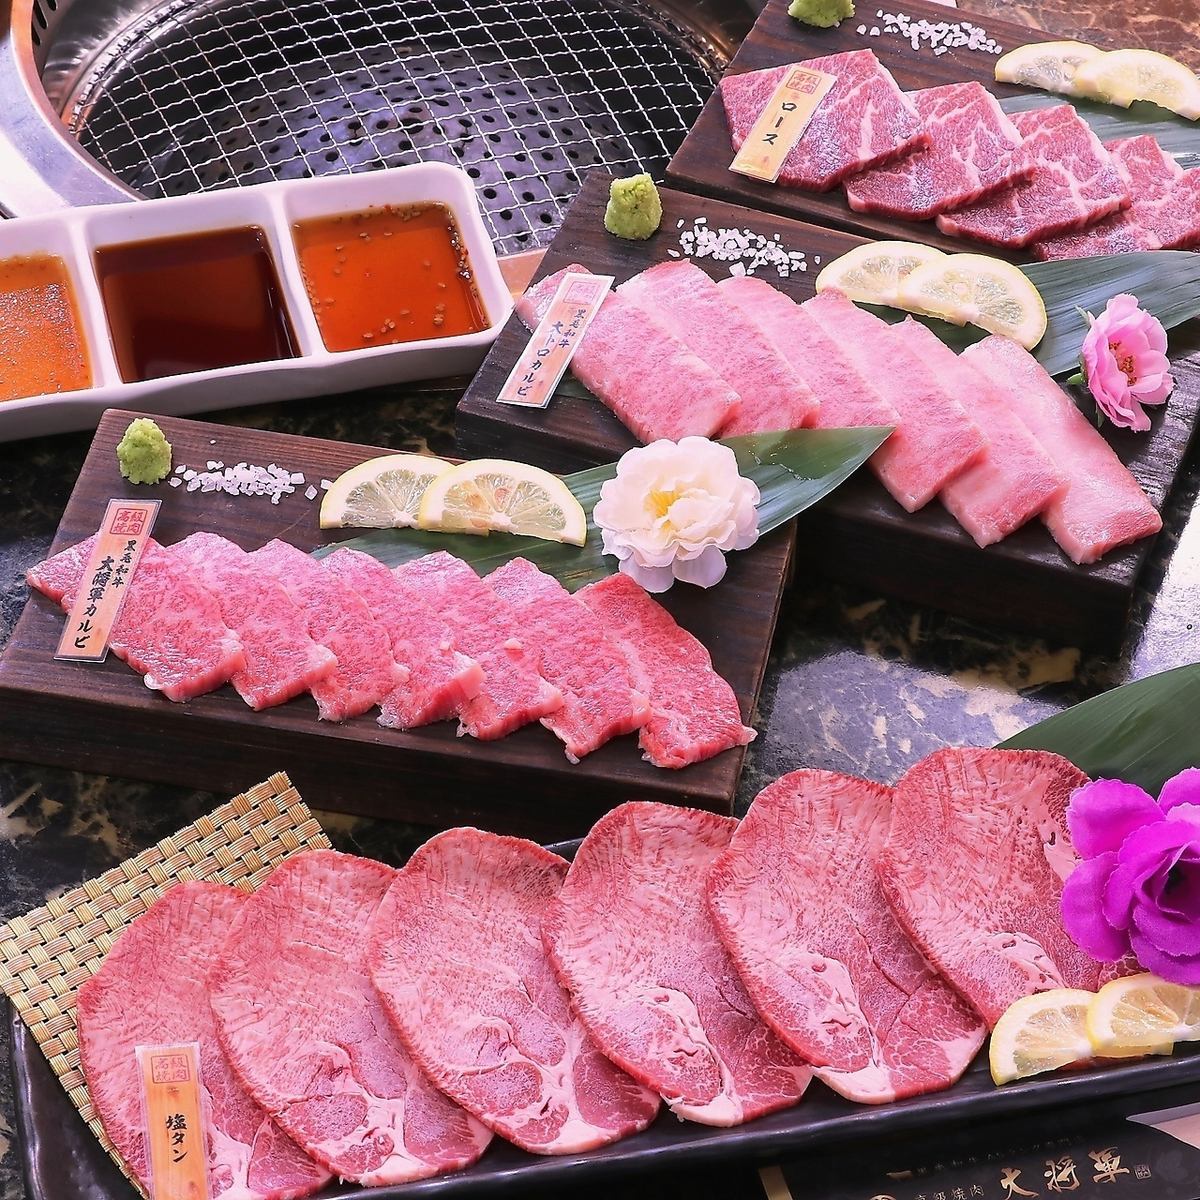 Only Japanese black beef A5 grade BMS10,11,12 is used! We are particular about overwhelming cost performance and offer it at a surprisingly low price ♪